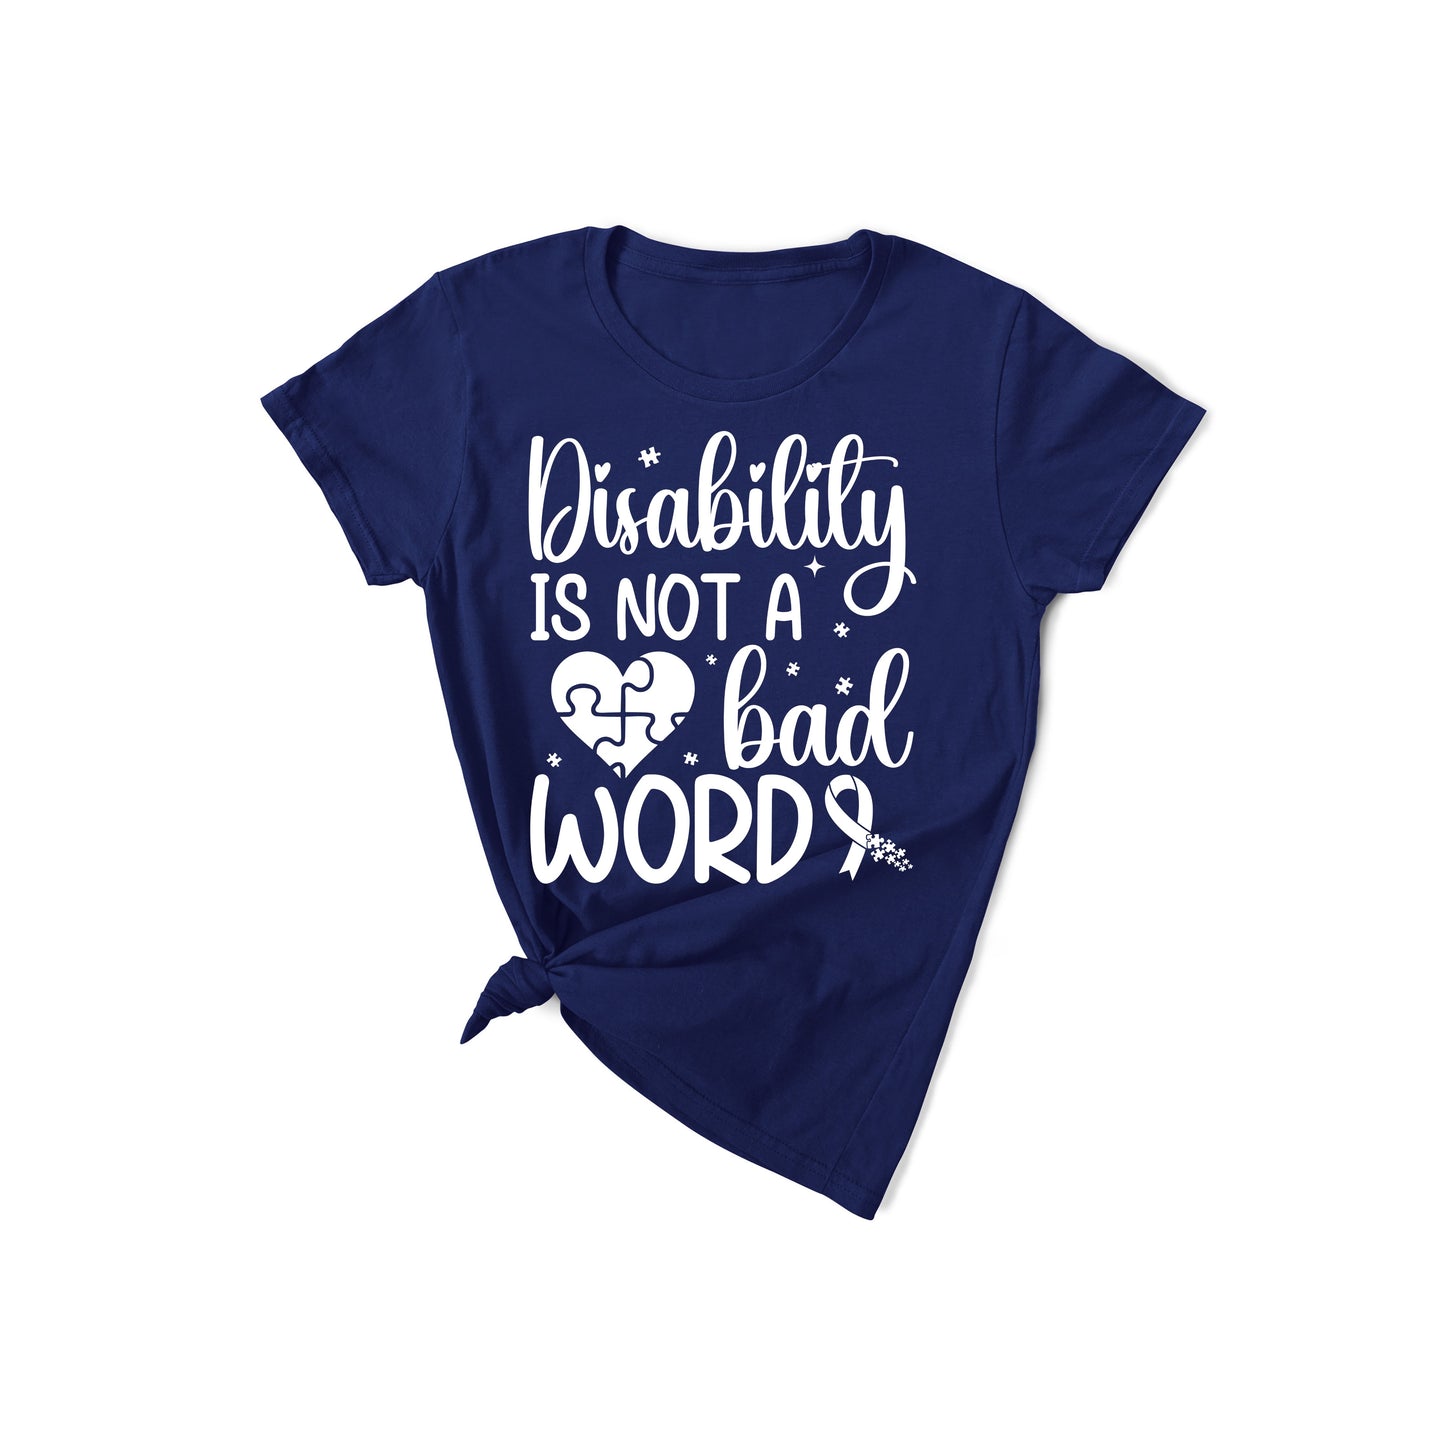 Disability Is Not a Bad Word - White Text - T-Shirt